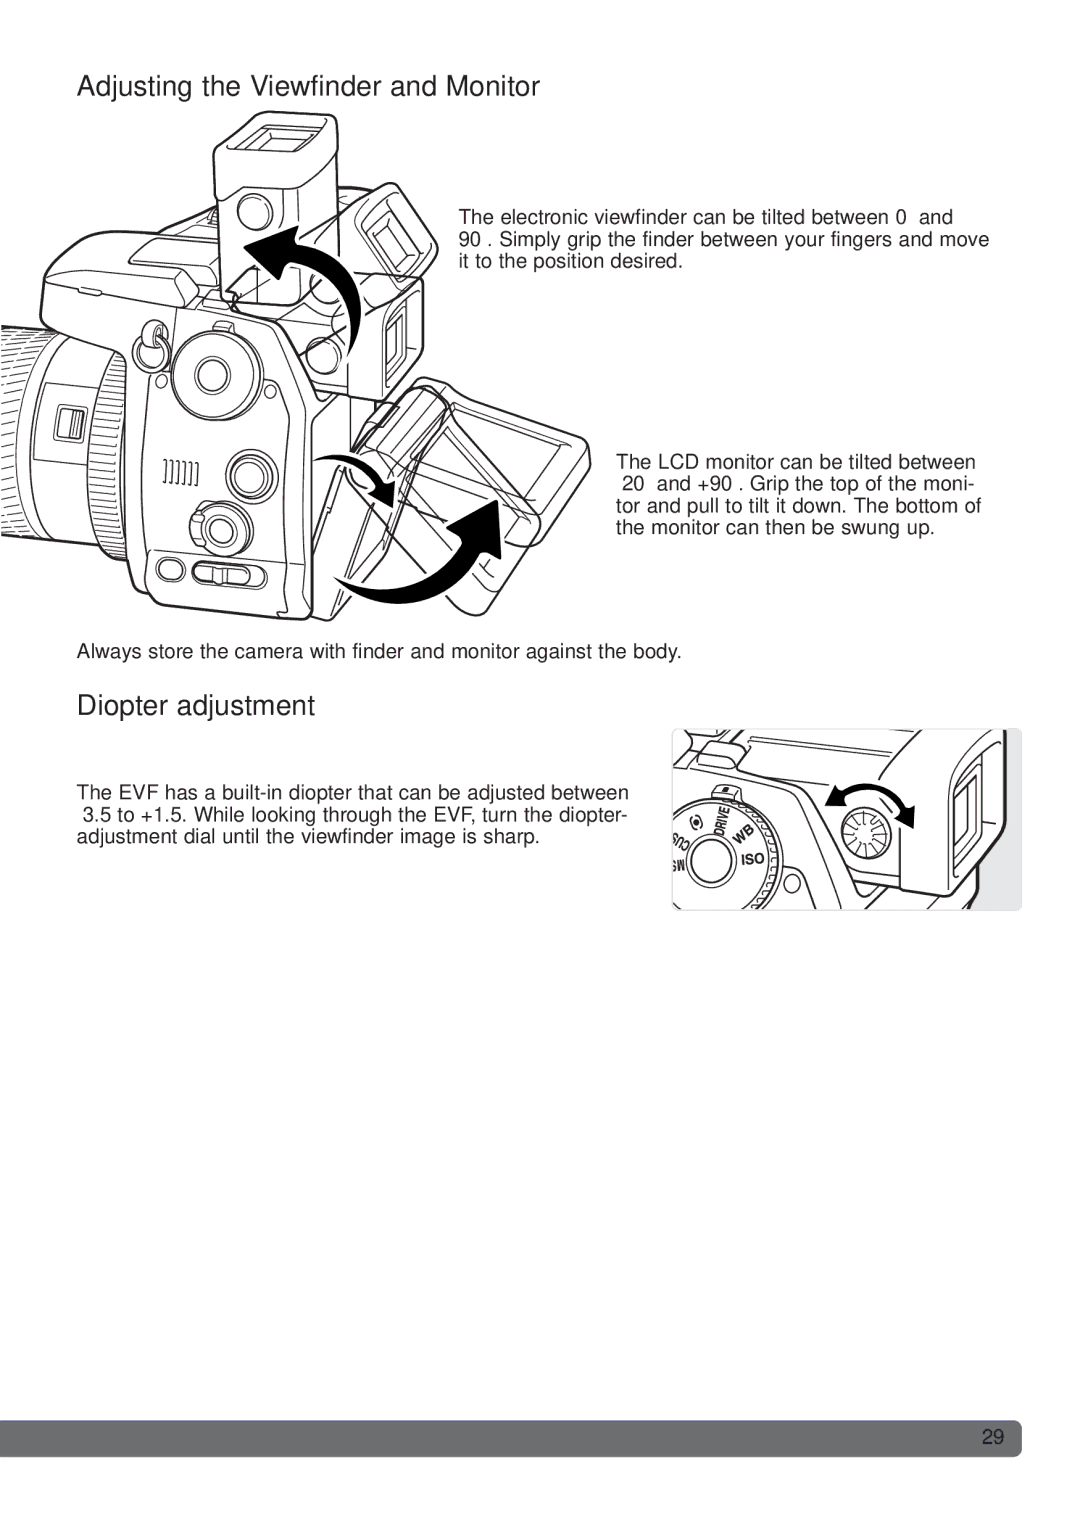 Konica Minolta DiMAGE_A2 instruction manual Adjusting the Viewfinder and Monitor, Diopter adjustment 